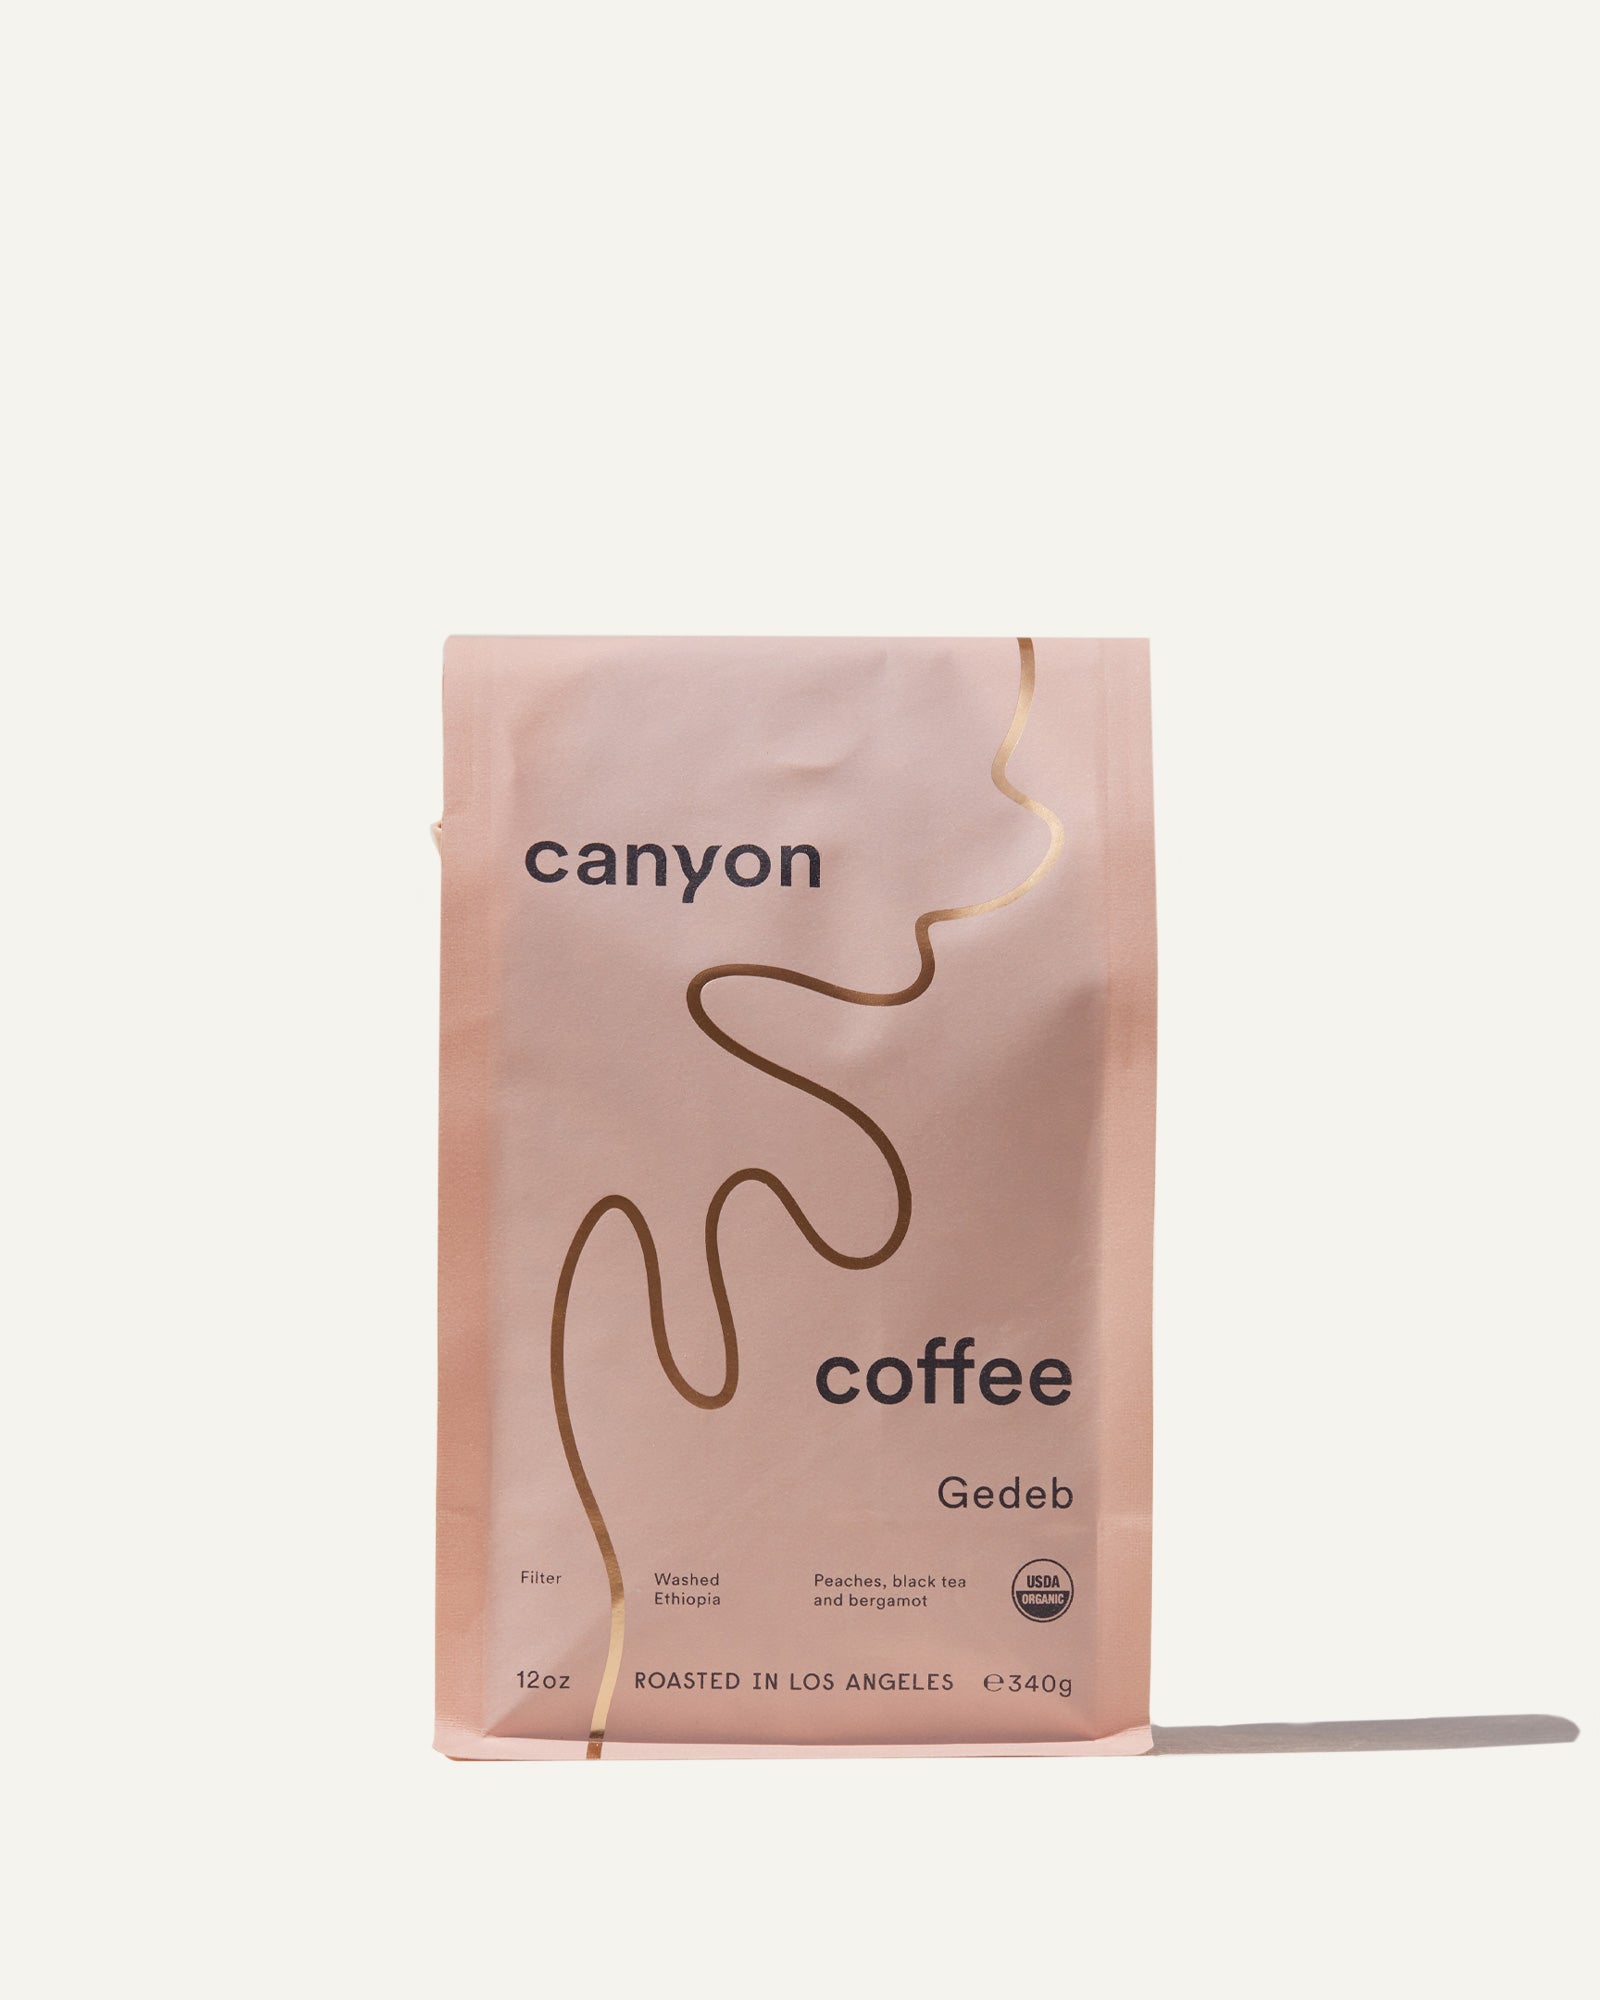 A bag of Gedeb Whole Bean coffee by Canyon Coffee with gold foil